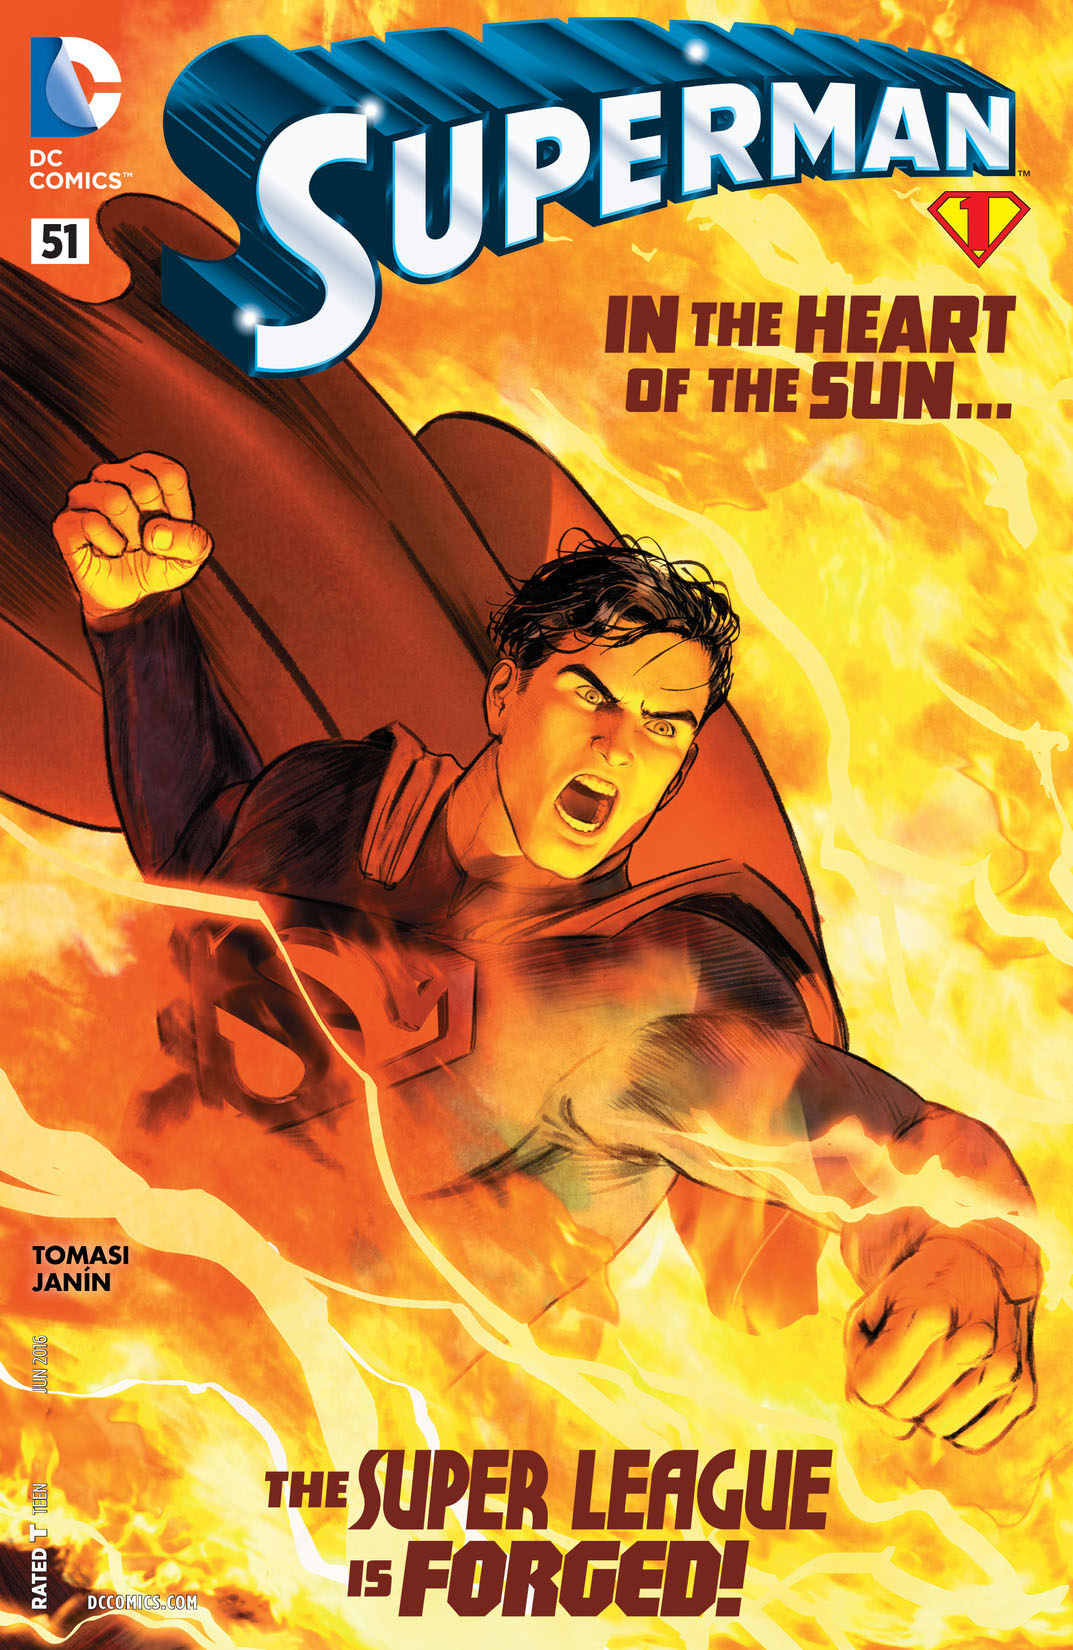 Superman (2011-) #51 preview images